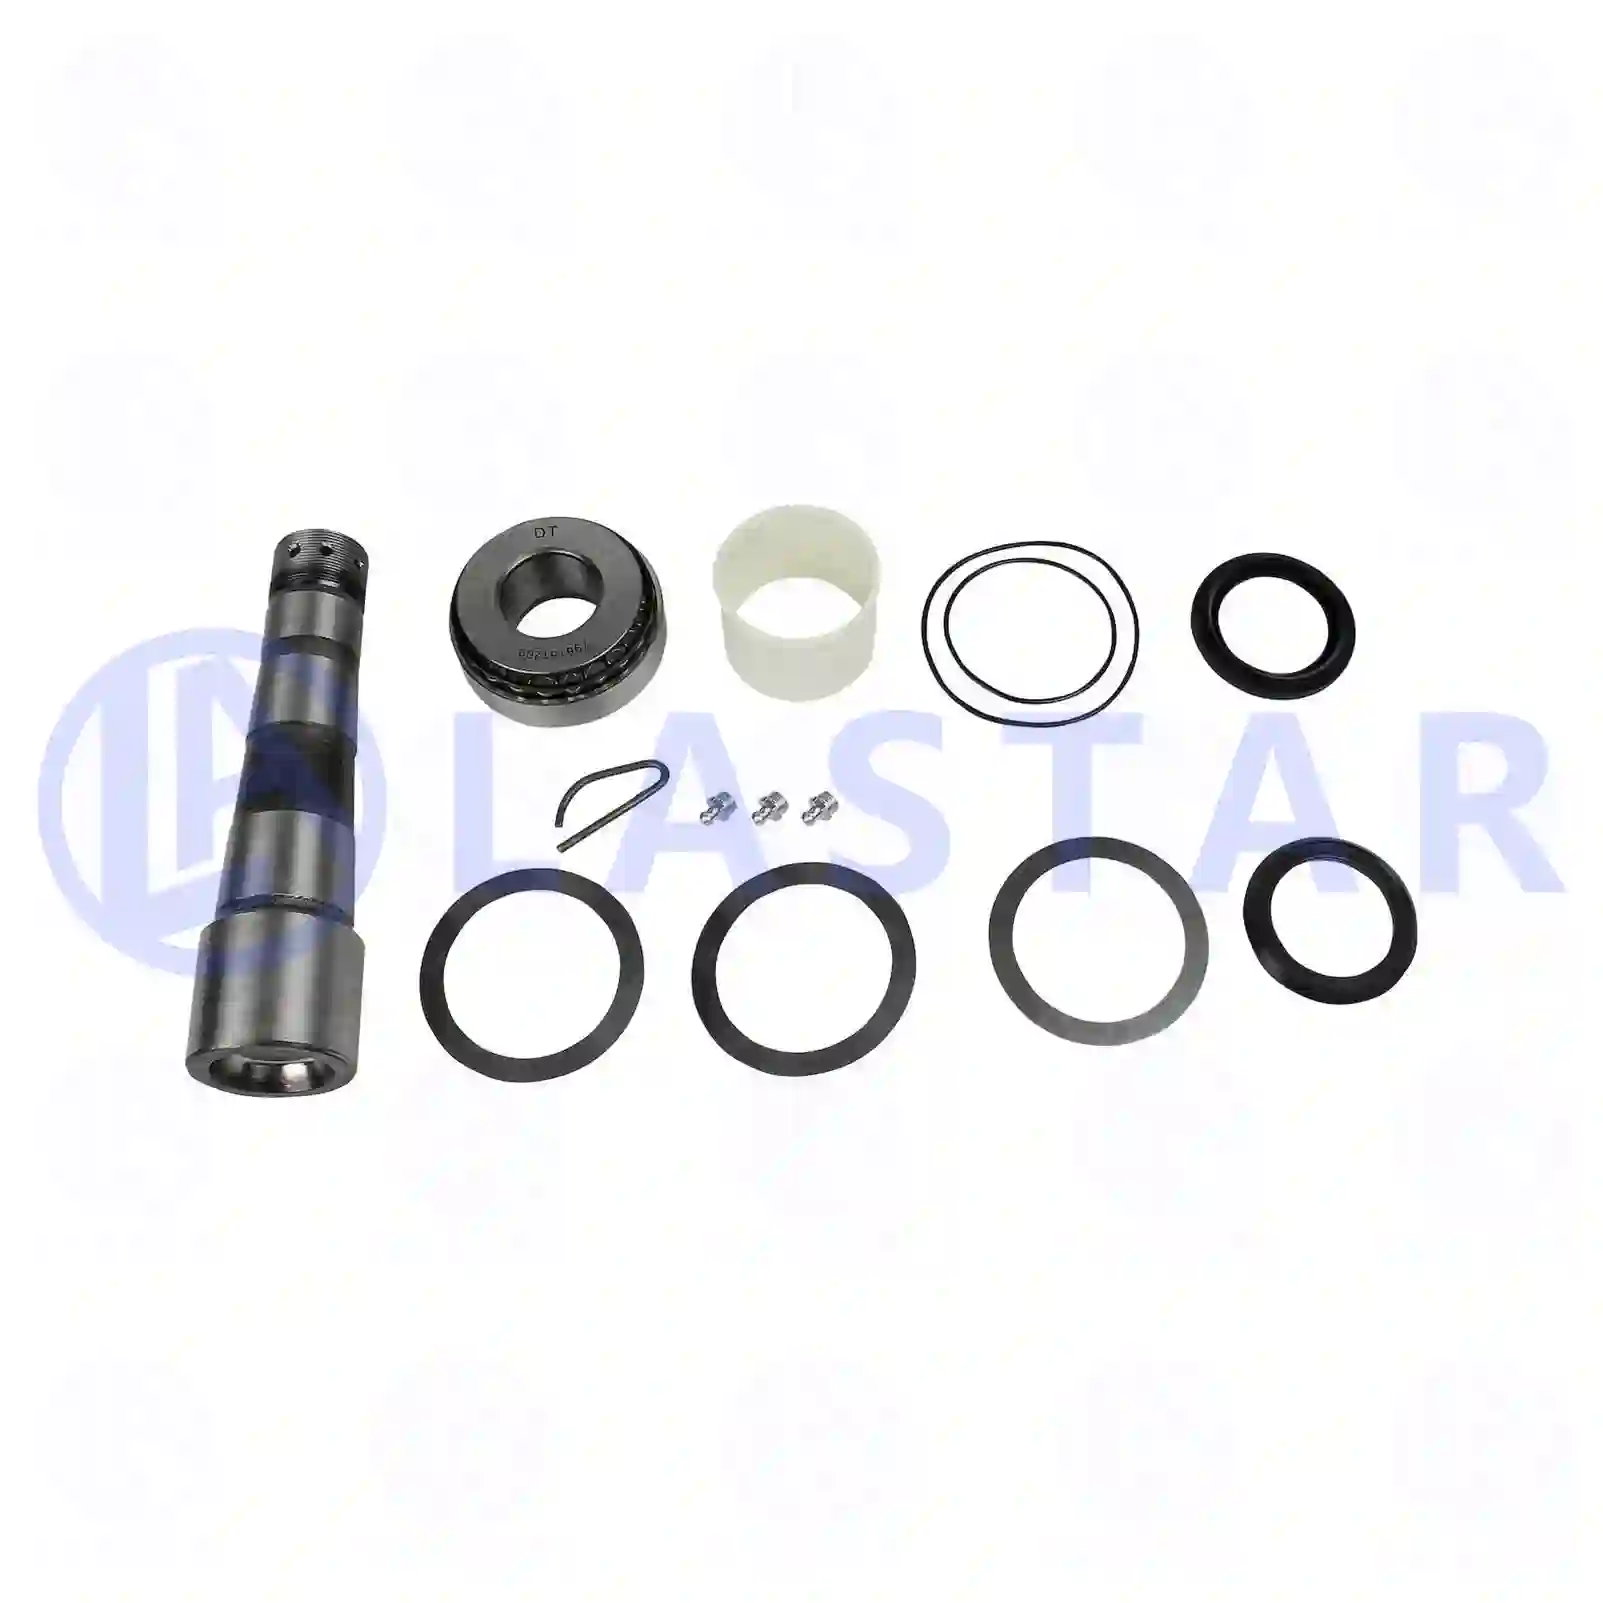 King pin kit, with bearing, 77731424, 3093731S, ZG41296-0008, , ||  77731424 Lastar Spare Part | Truck Spare Parts, Auotomotive Spare Parts King pin kit, with bearing, 77731424, 3093731S, ZG41296-0008, , ||  77731424 Lastar Spare Part | Truck Spare Parts, Auotomotive Spare Parts